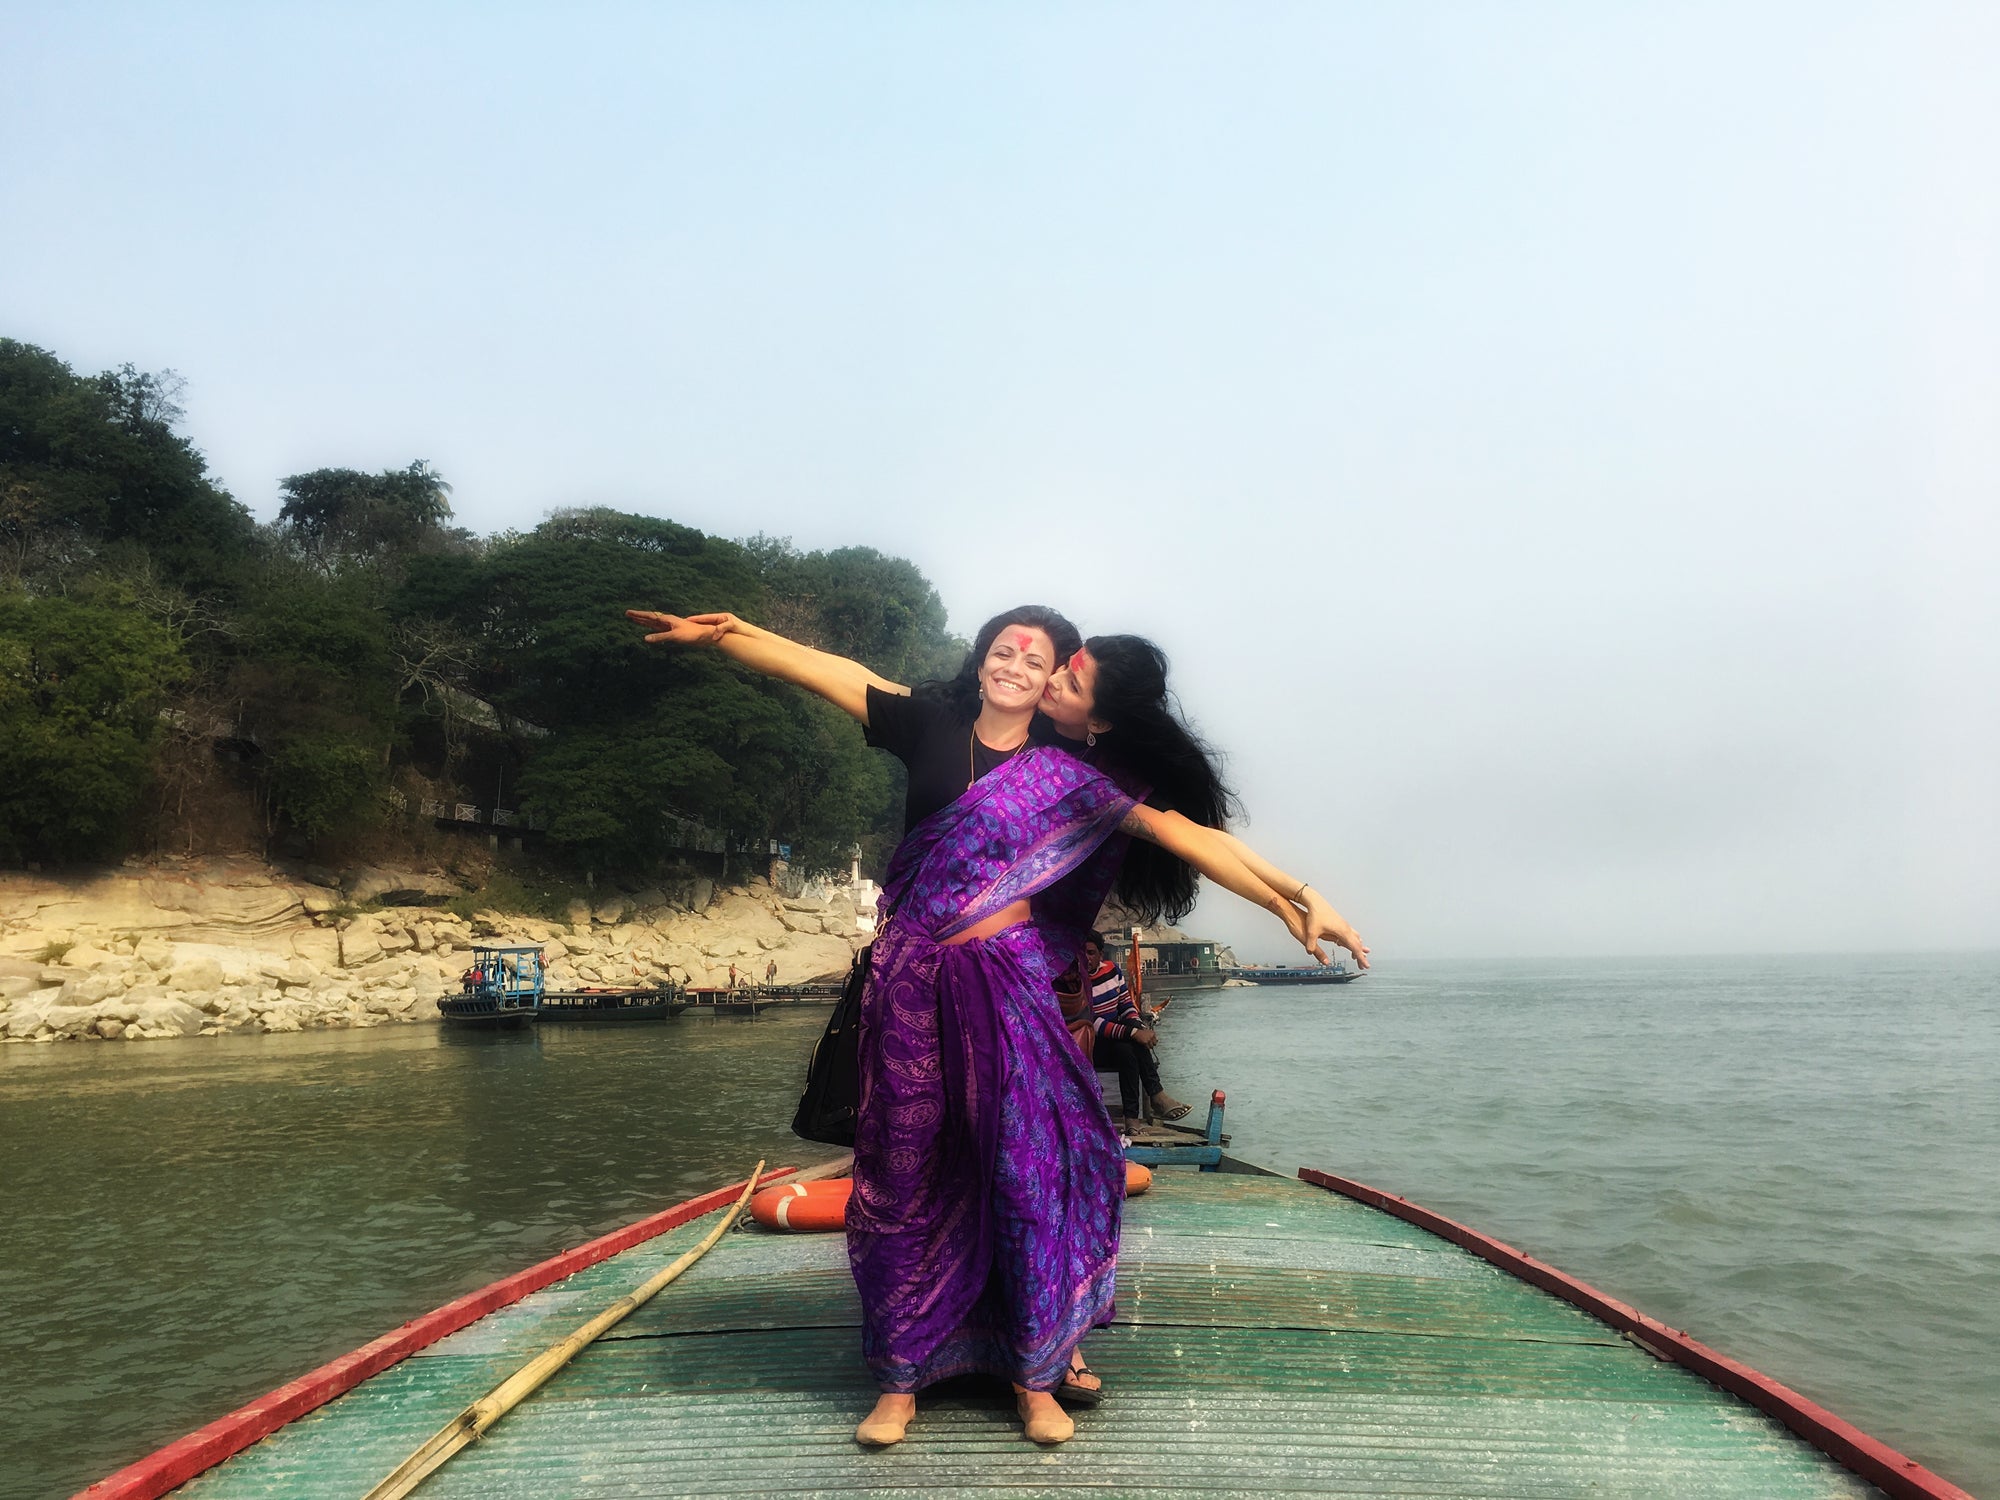 Loni and me on a boat in India